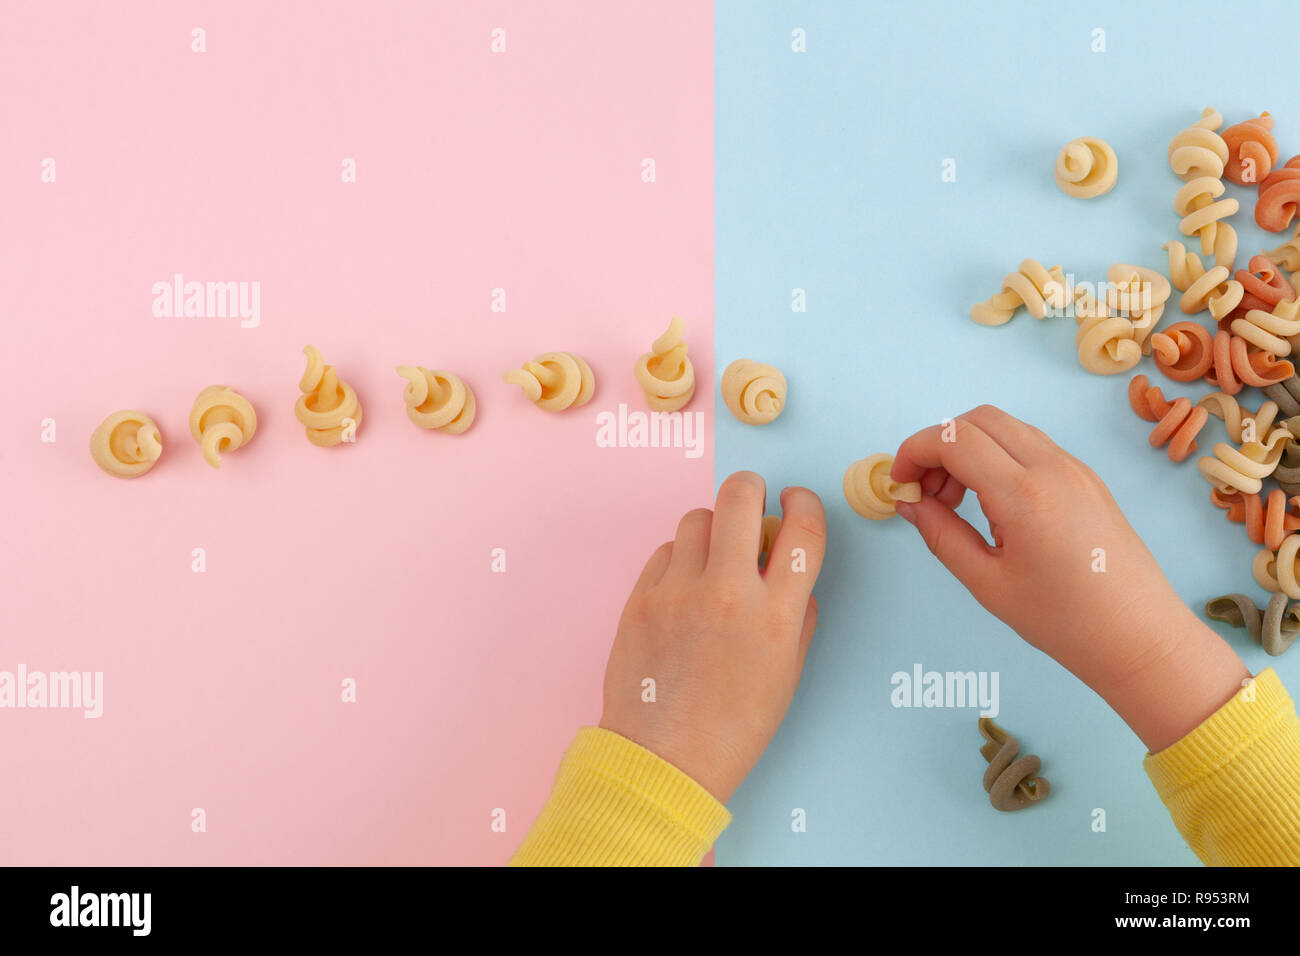 Child's hands playing with Funghetto veggie pasta on colored table with copy space Stock Photo